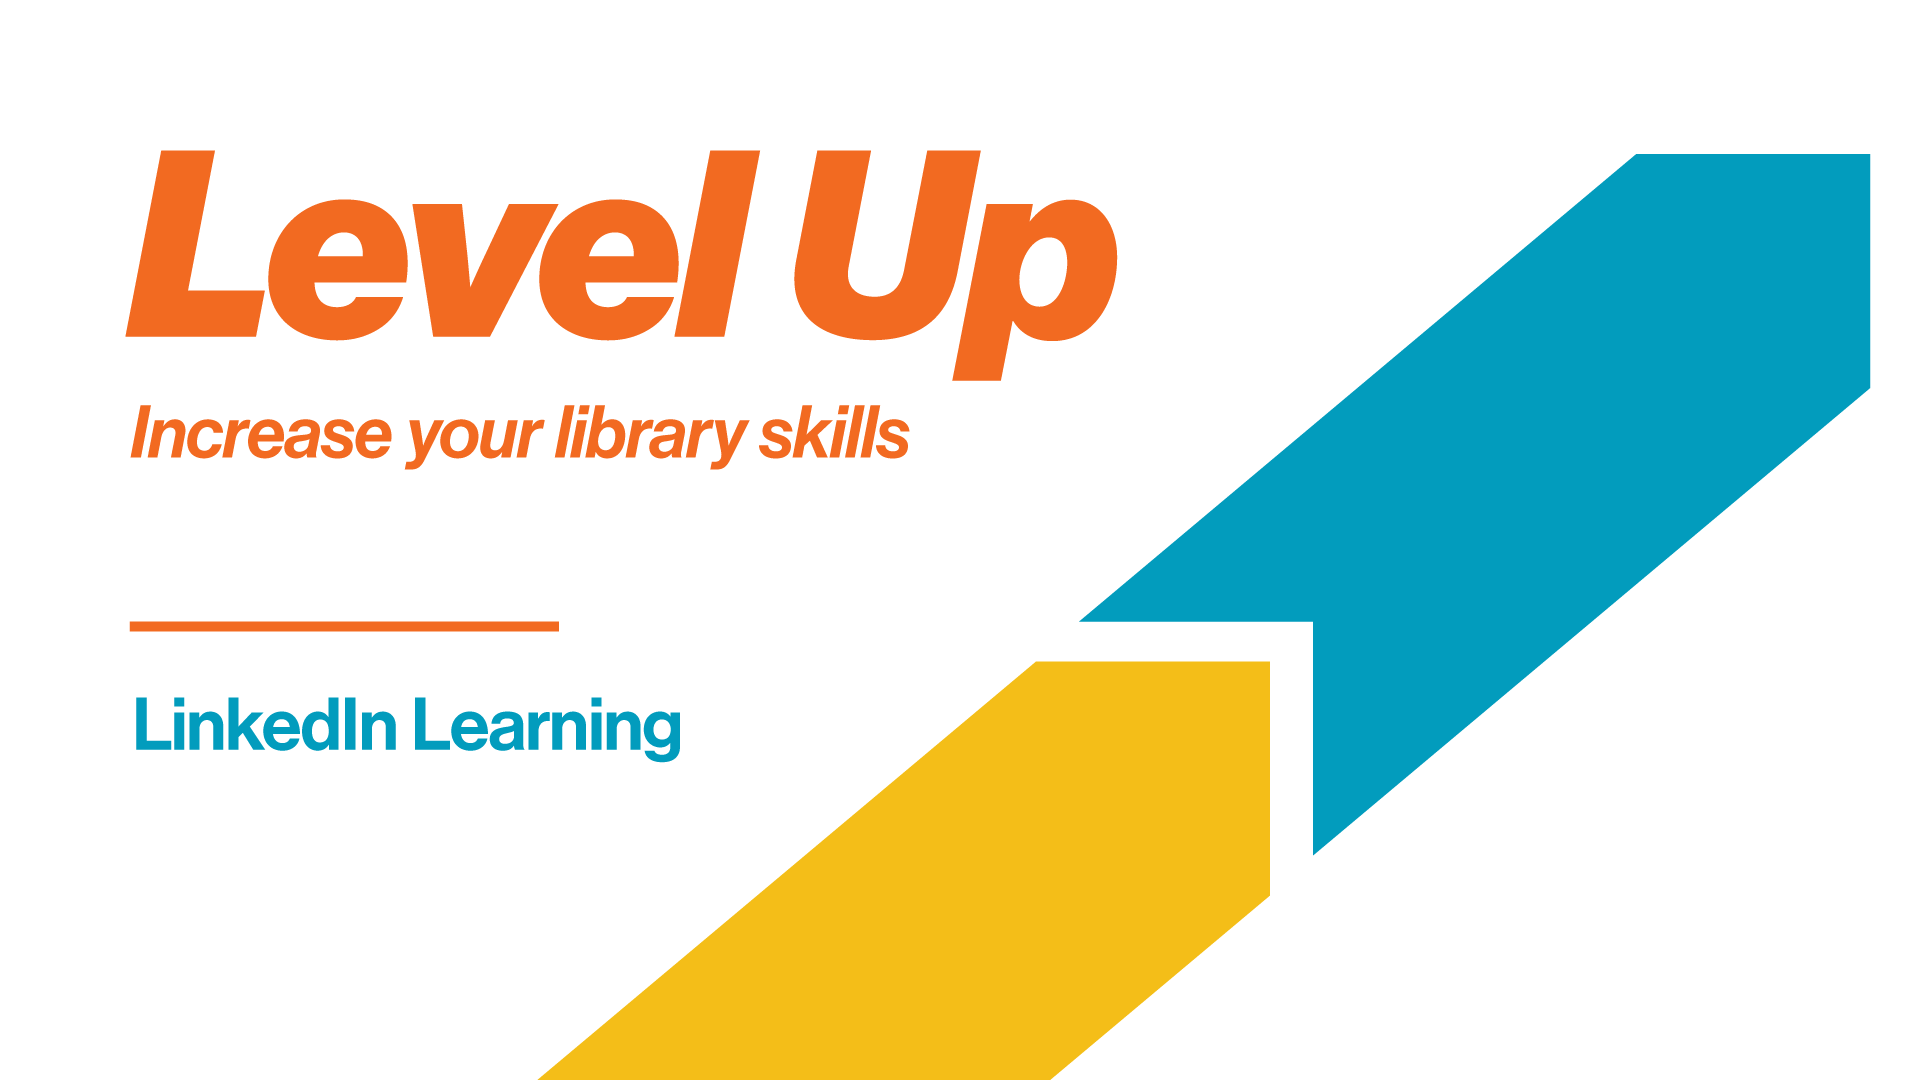 Level Up: Increase your library skills